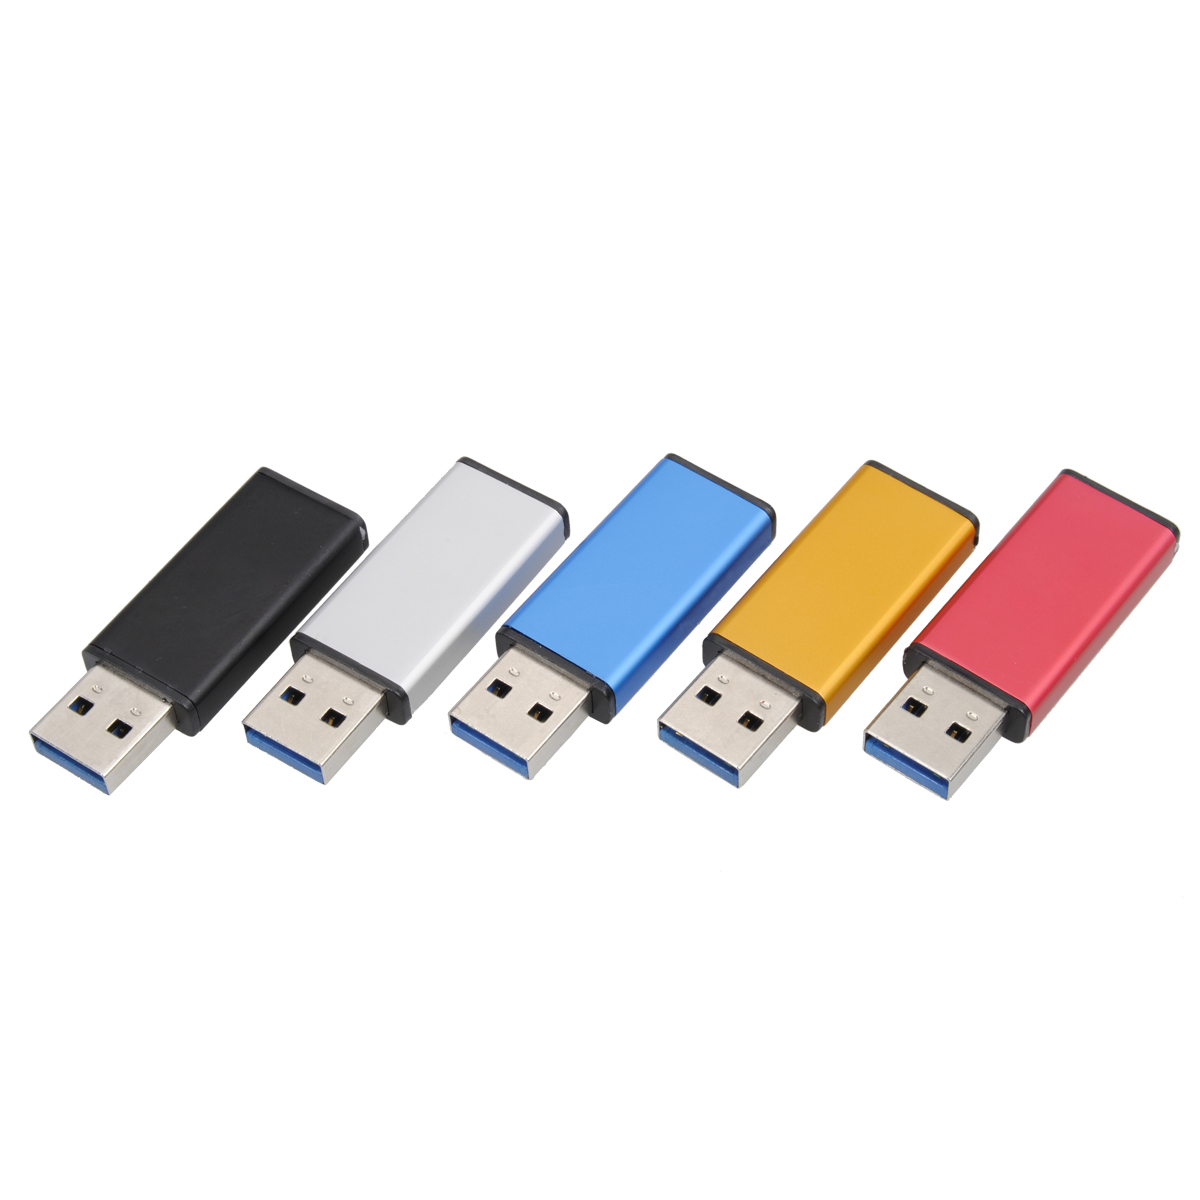 Find 64G USB 3 0 Flash Drive Mini USB Disk Portable Thumb Drive Memory Stick for Computer Laptop for Sale on Gipsybee.com with cryptocurrencies